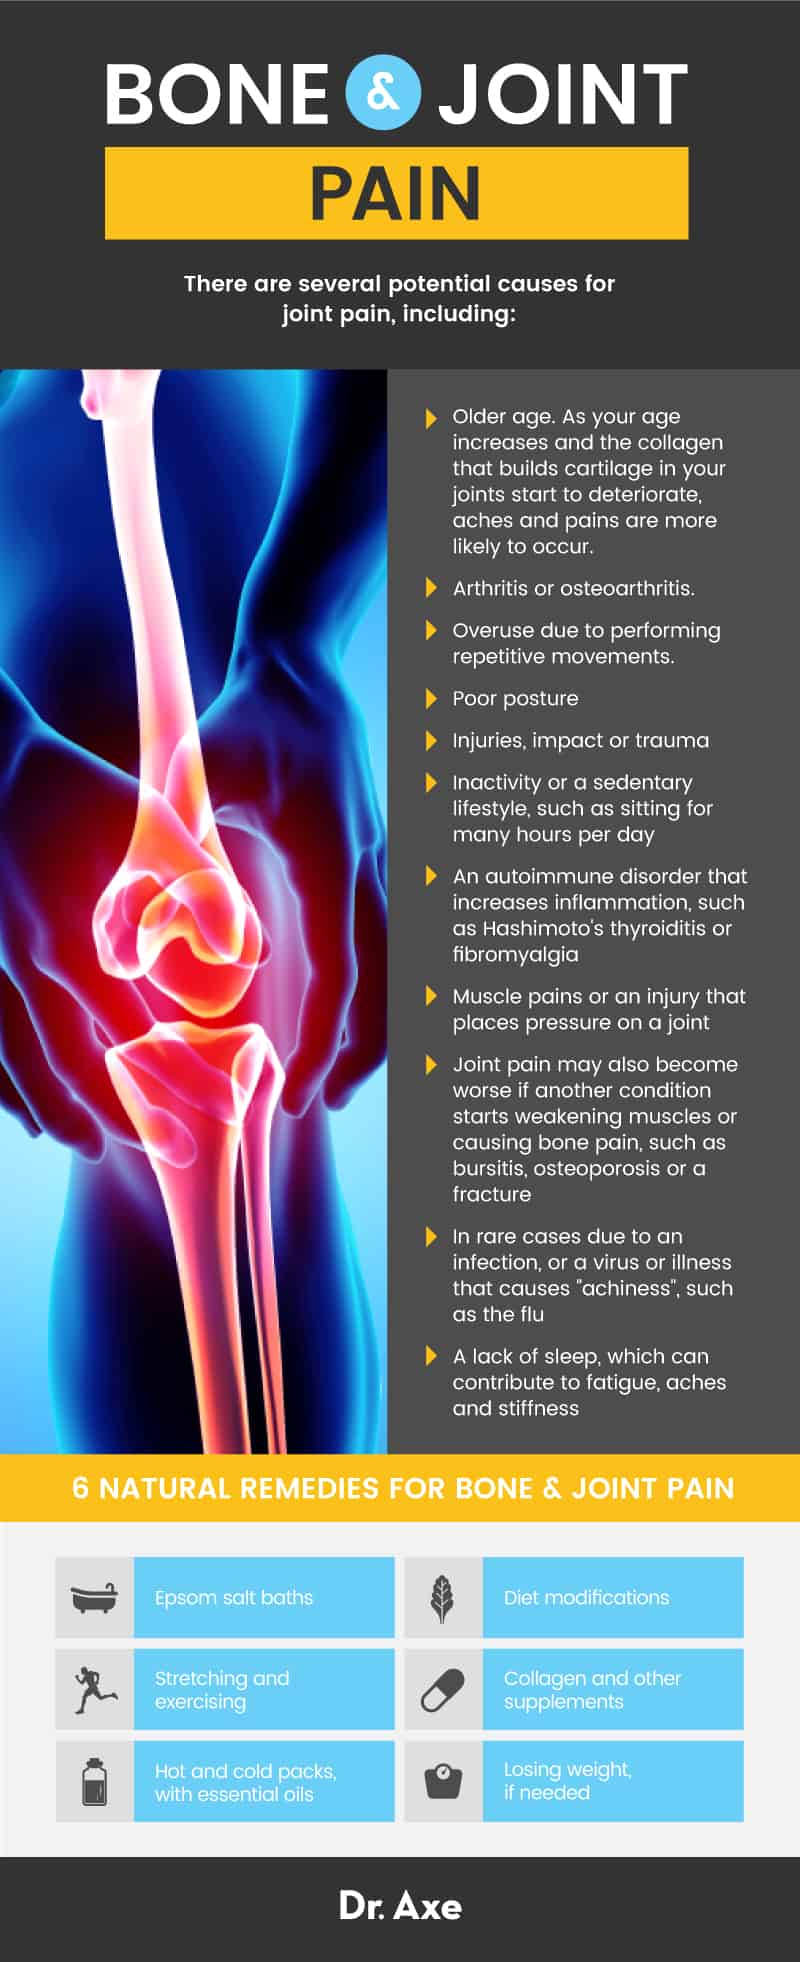 Natural remedies for bone and joint pain: bone and joint pain - Dr. Axe